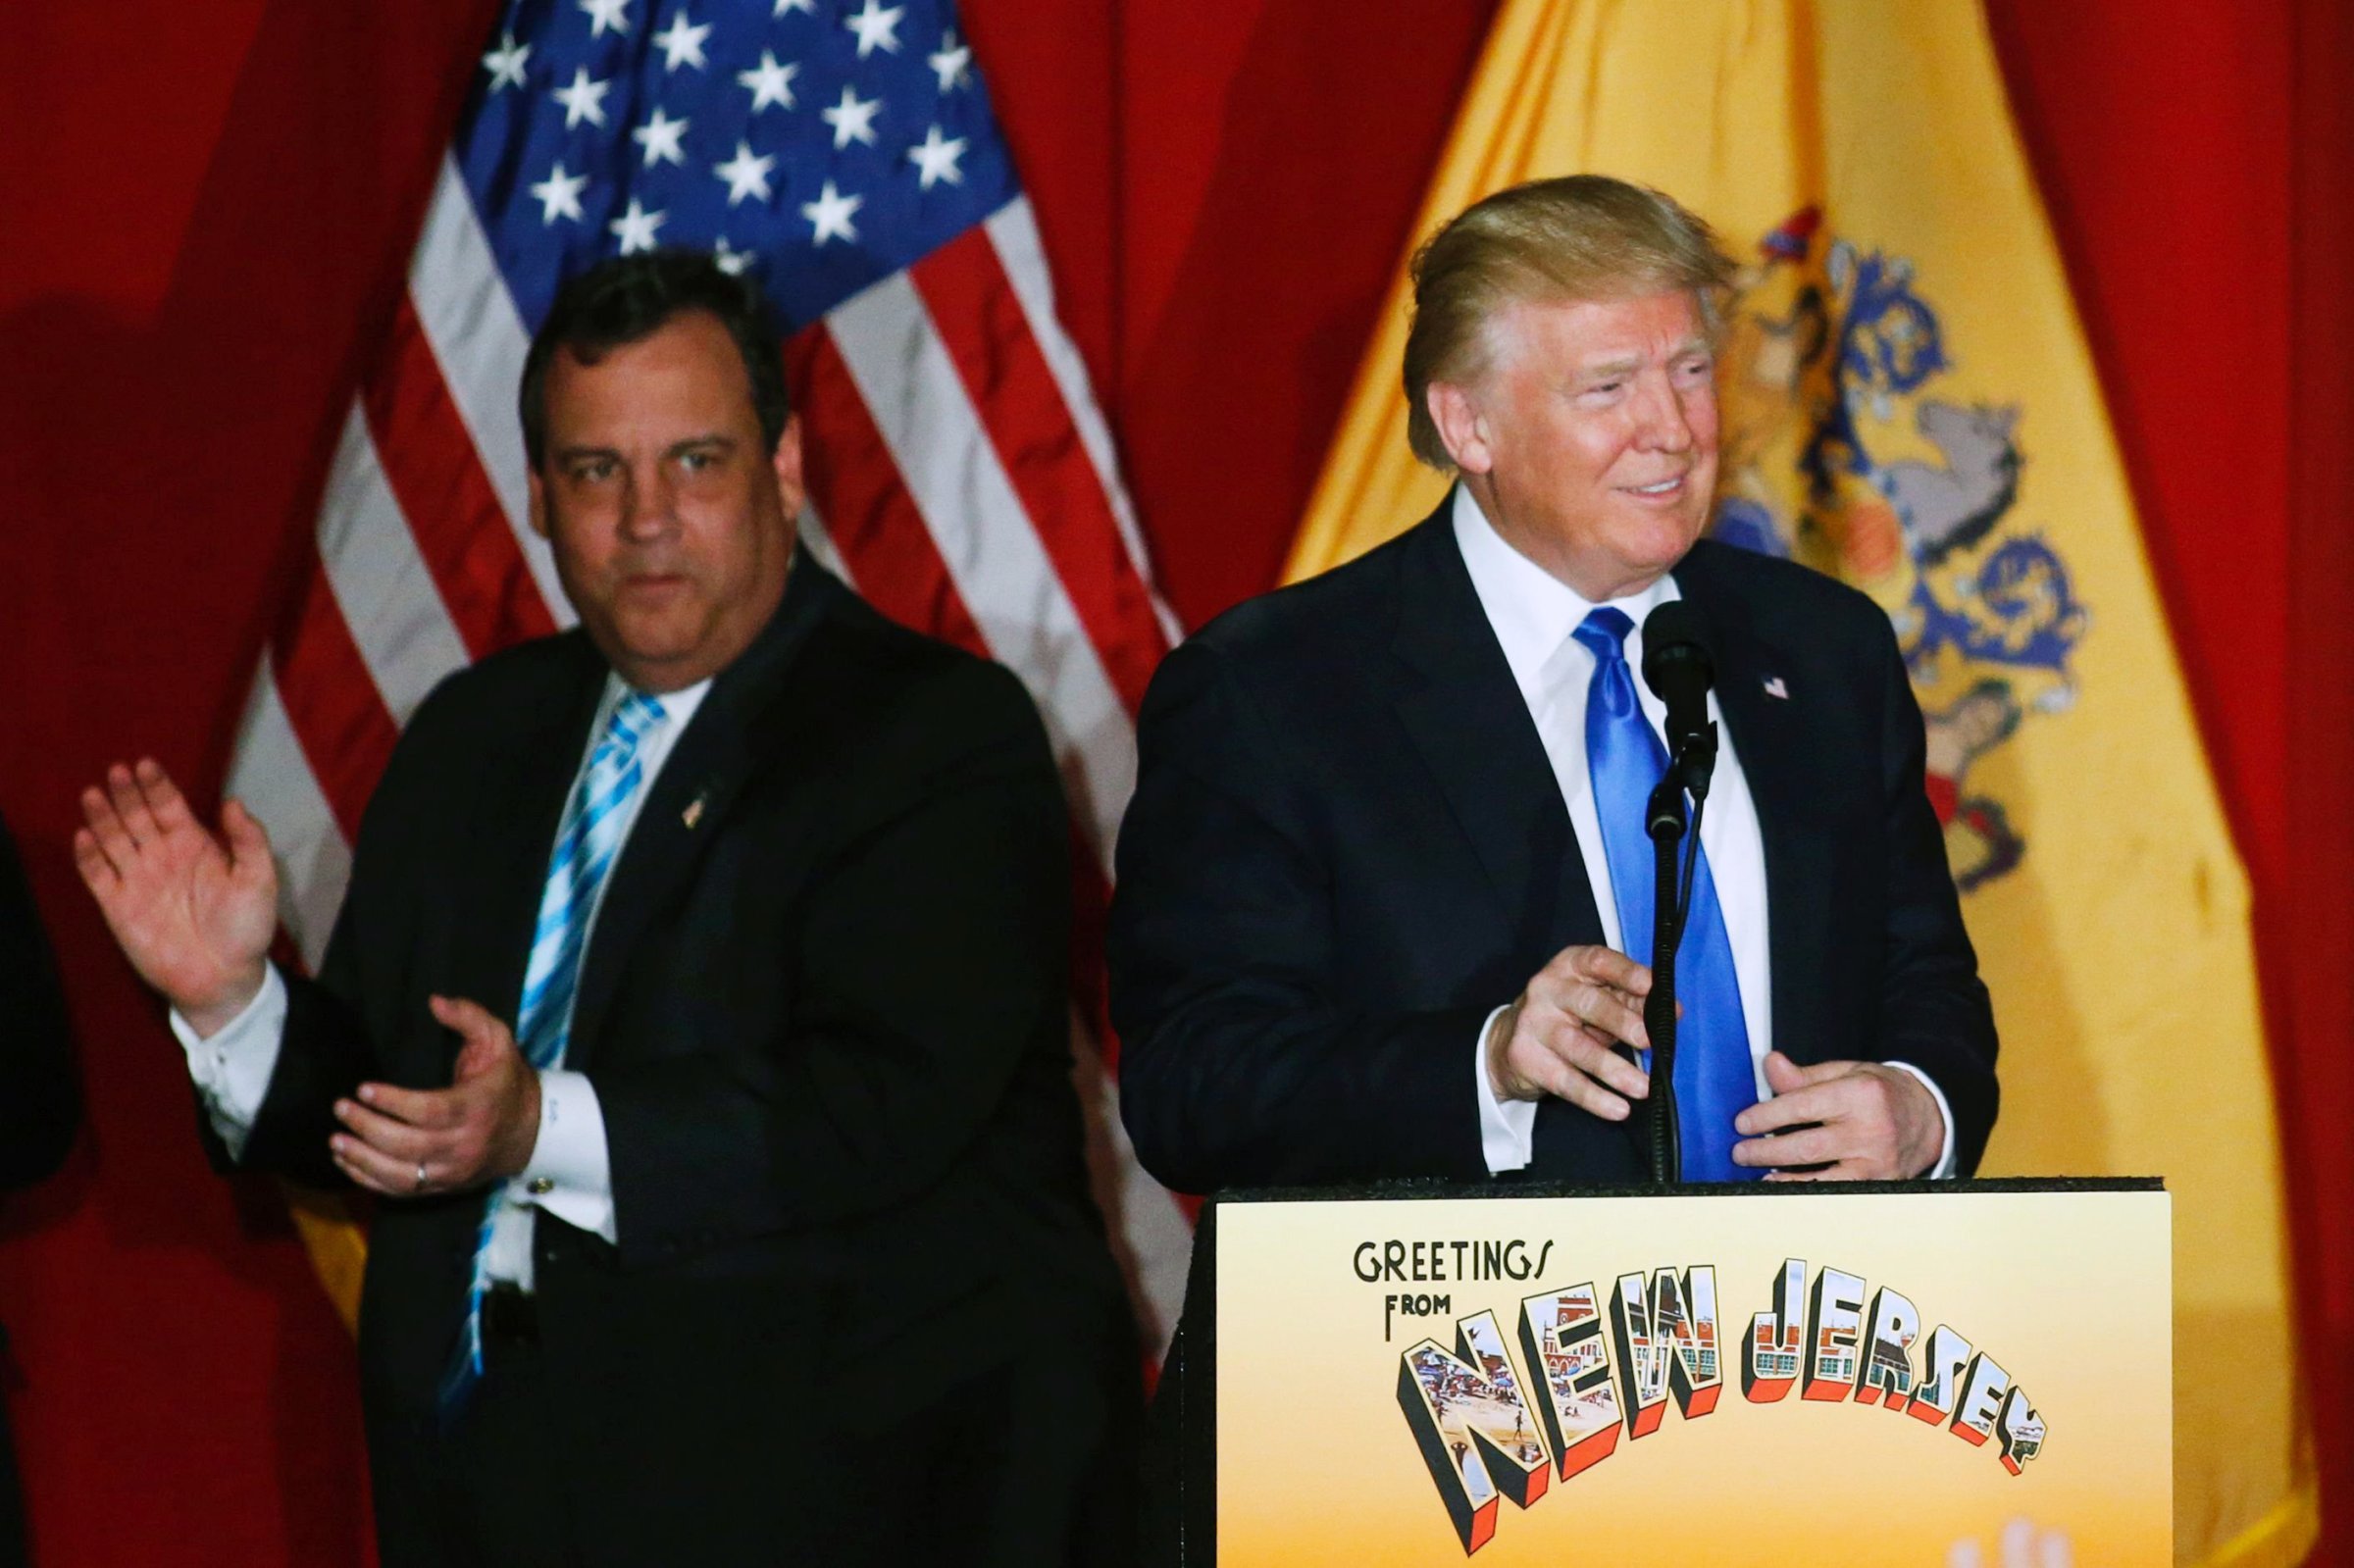 Republican presidential candidate Donald Trump and New Jersey Gov. Chris Christie greet the crowd at a fundraising event in Lawrenceville, N.J. on May 19, 2016.